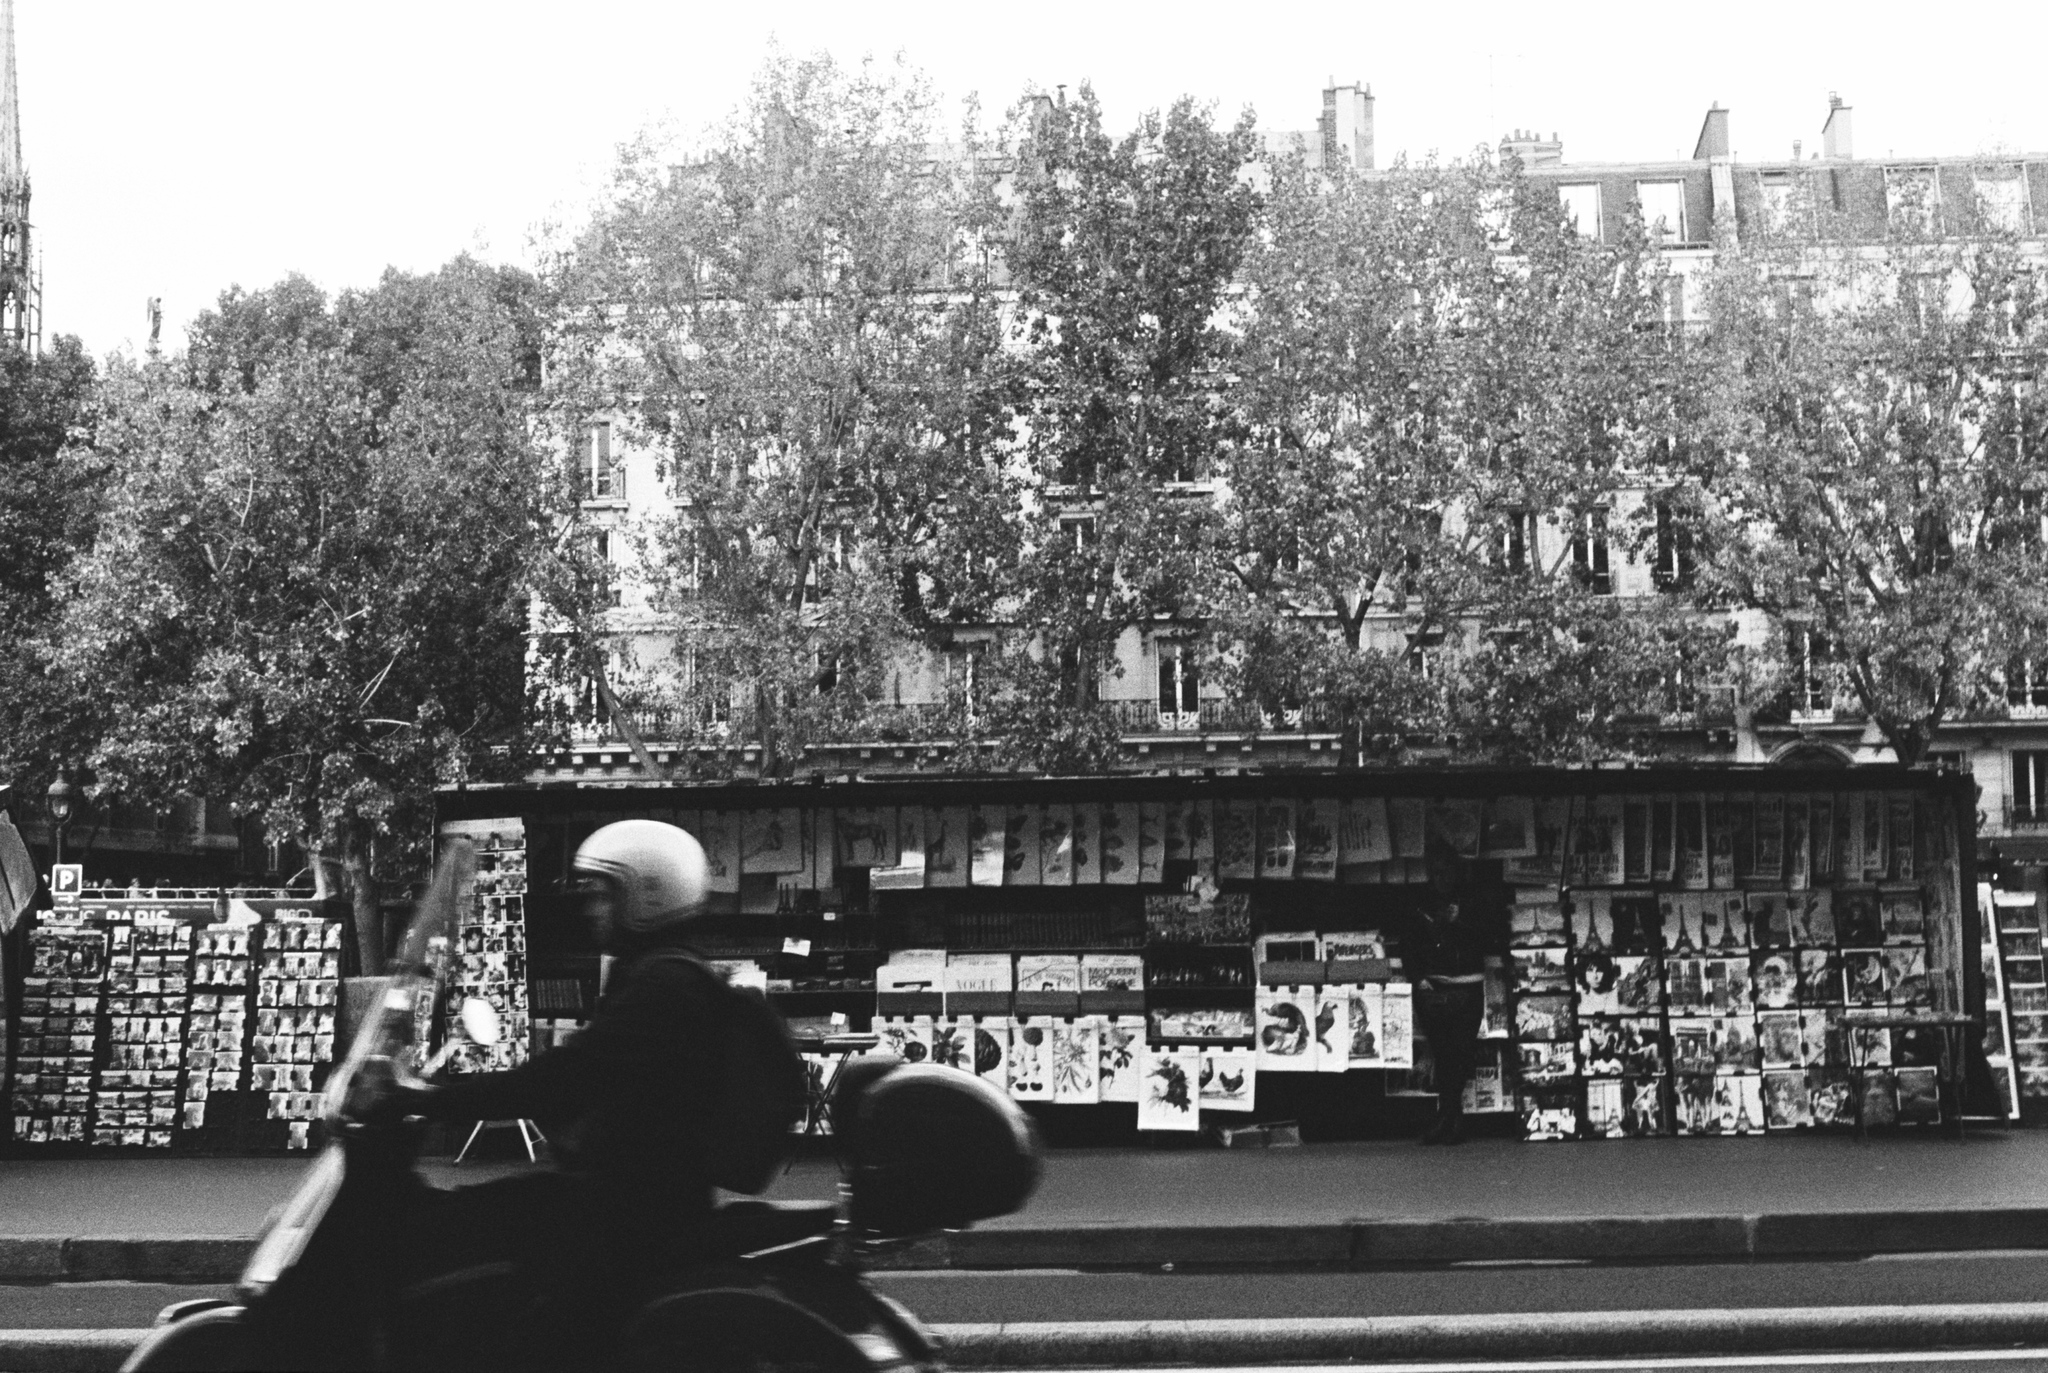 A book and art stand along the Seine river in Paris, France shot on black/white film.